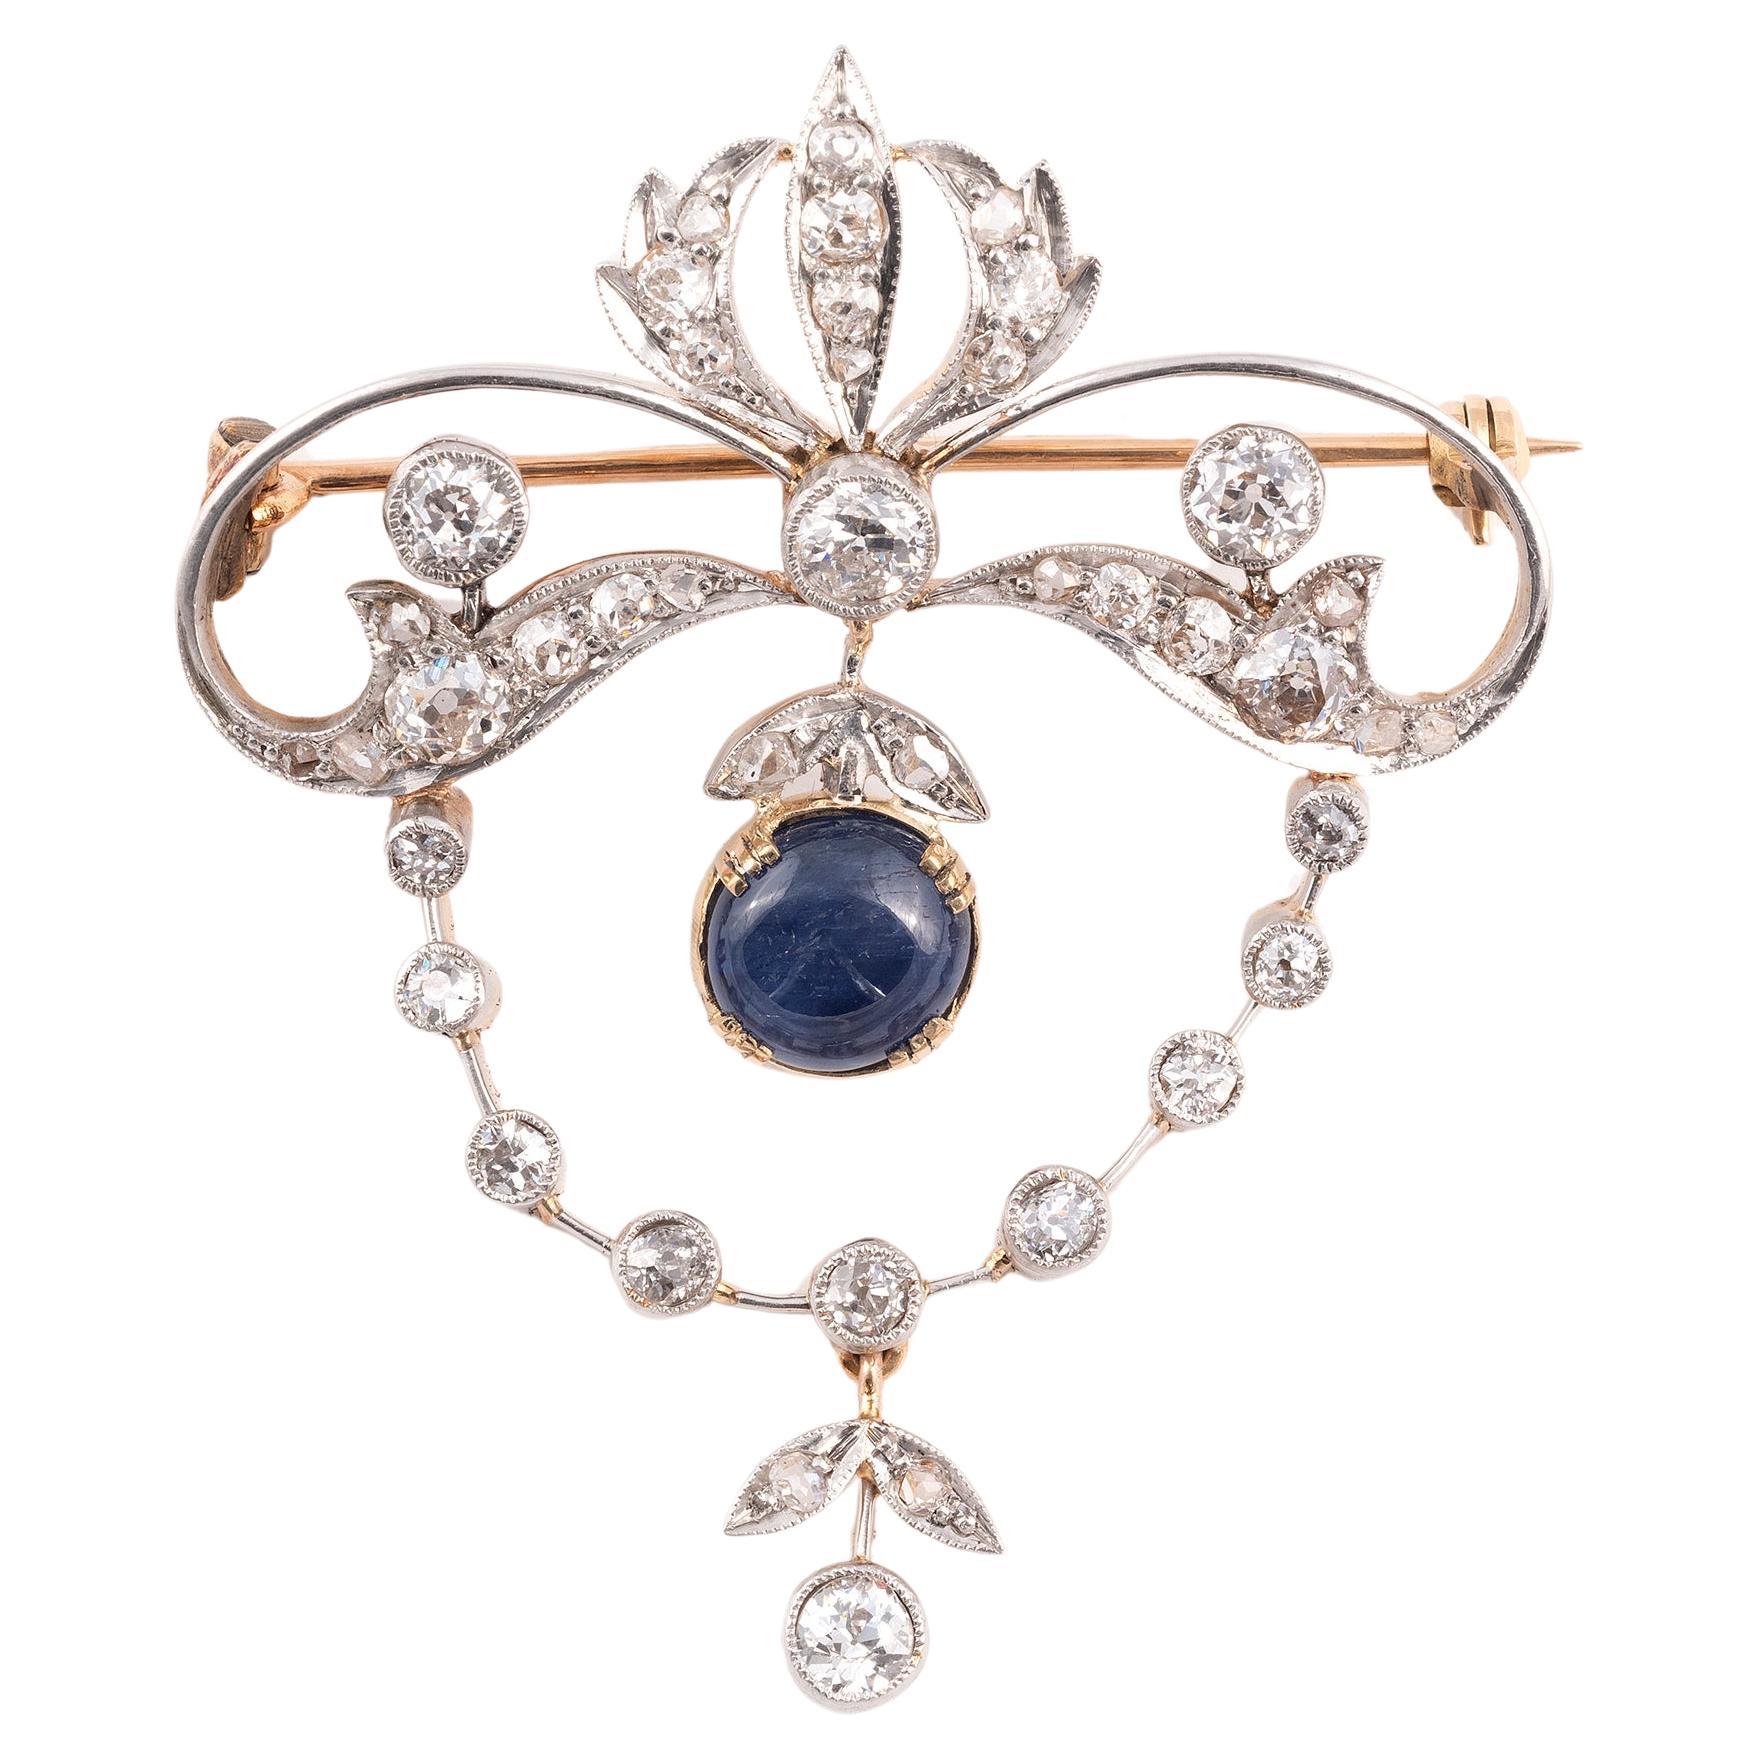 Of openwork design with central round sapphire cabochon approximately 2.5ct to an old brilliant-cut diamond scrolling surround approximately 1.5ct, circa 1880, mounted in platinum and gold,
Long : 4.5cm
Weight: 9,72
Original Case